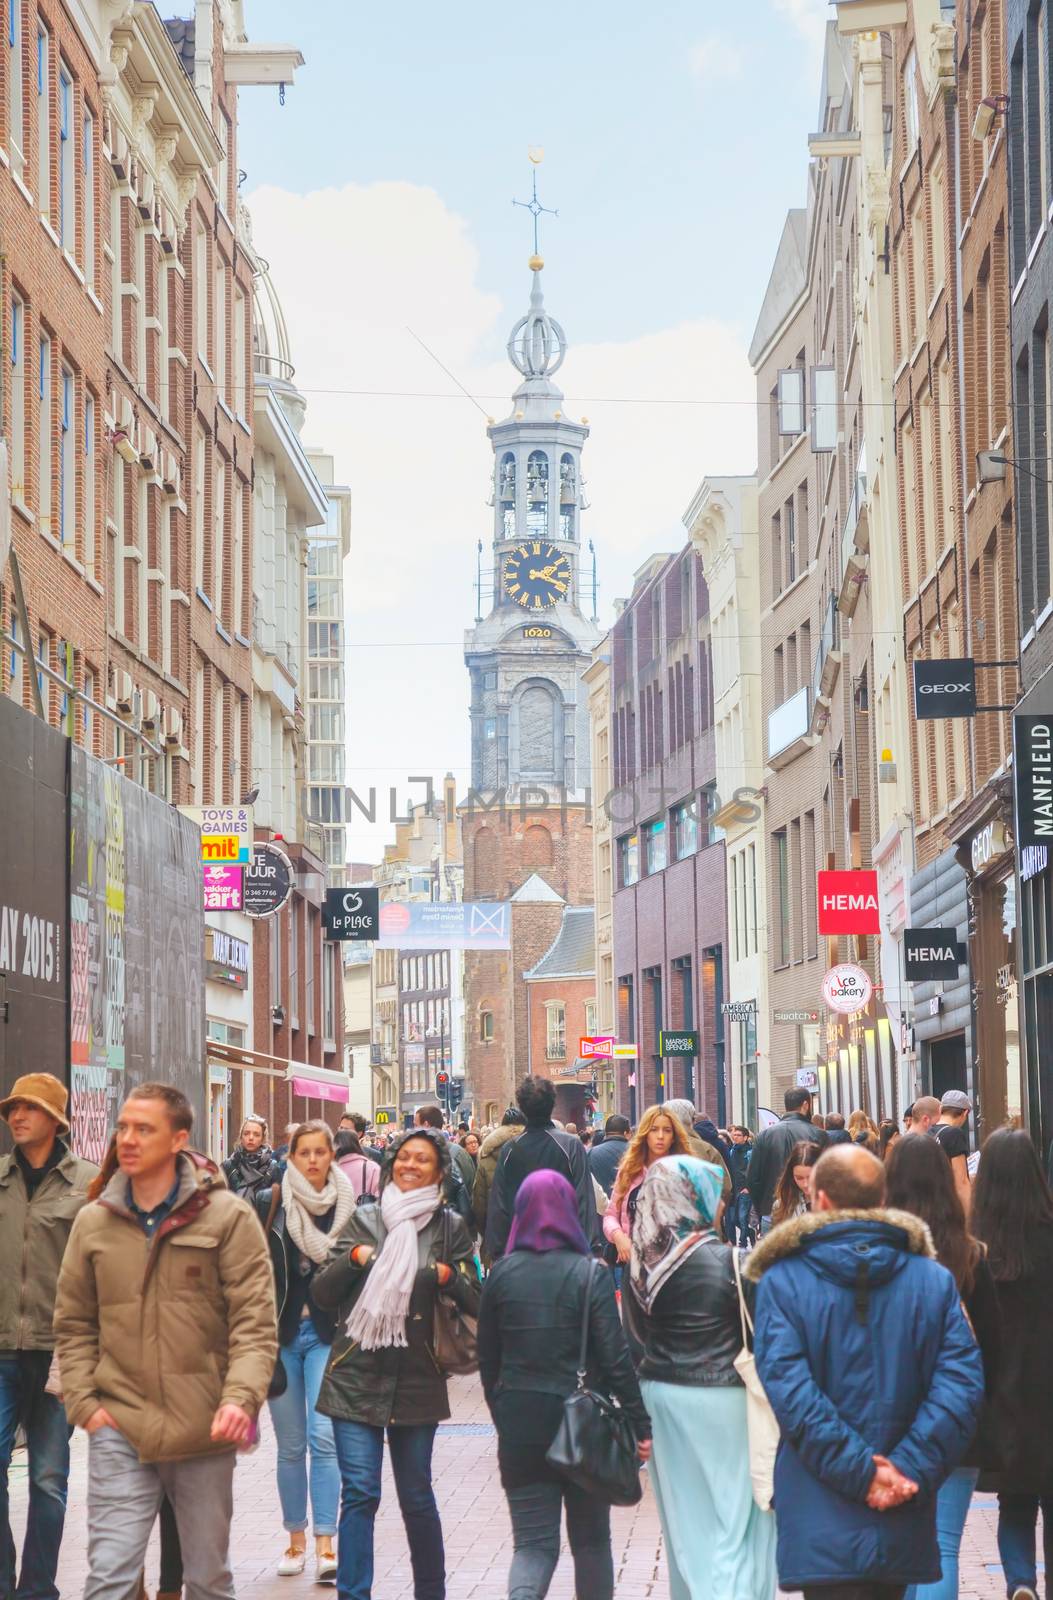 AMSTERDAM - APRIL 17: Narrow street crowded with tourists on April 17, 2015 in Amsterdam, Netherlands. It's the capital city and most populous city of the Kingdom of the Netherlands.